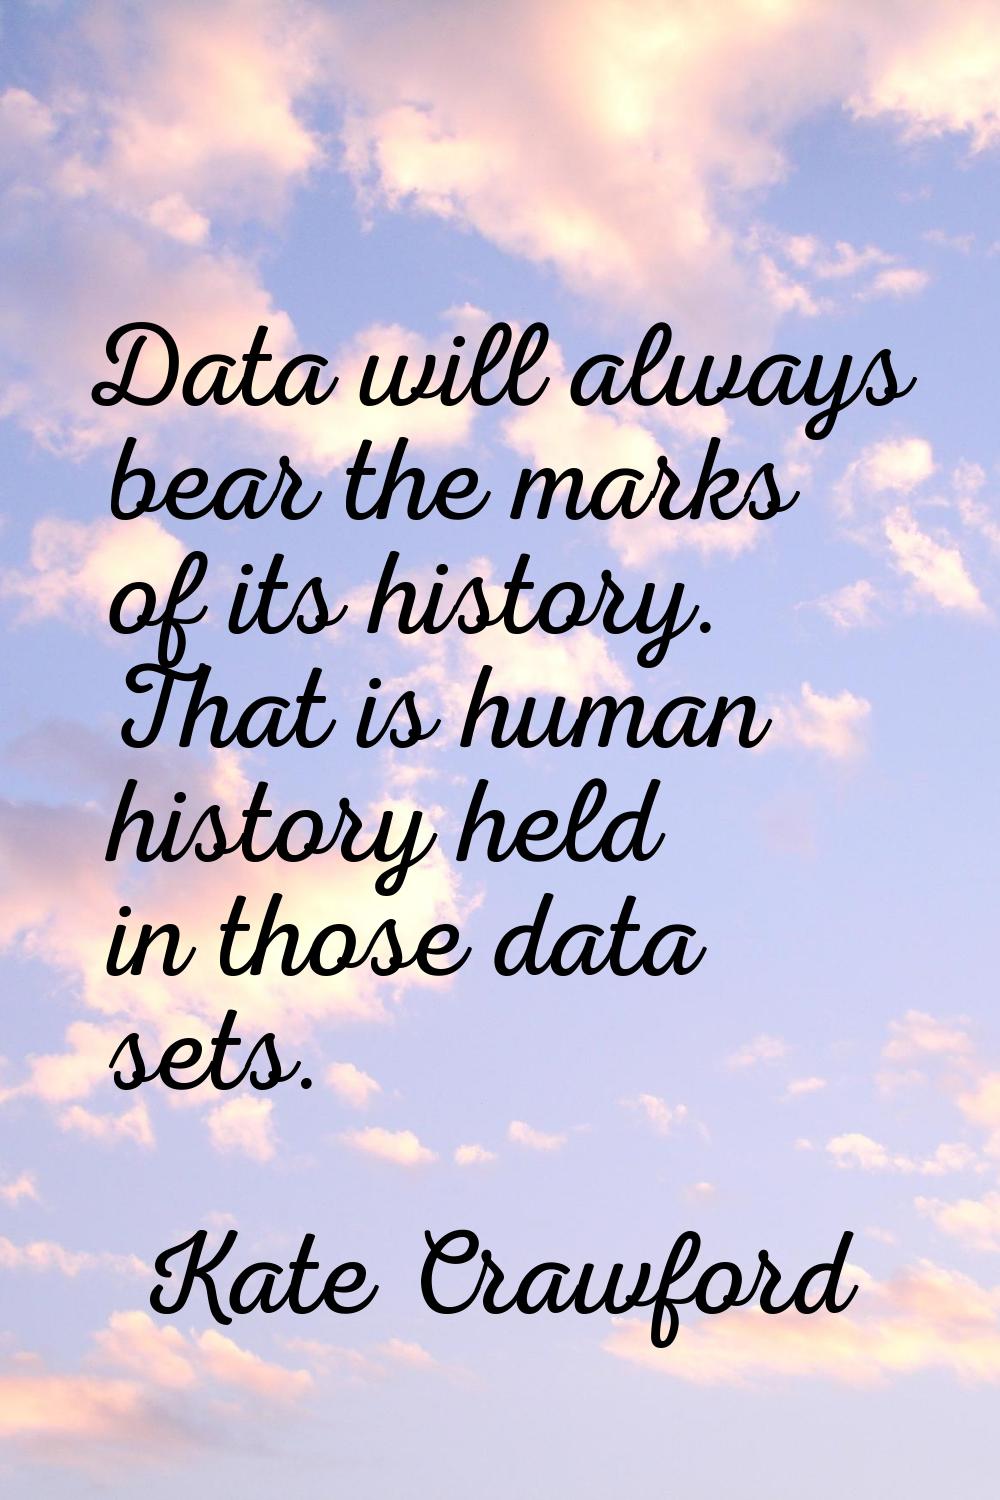 Data will always bear the marks of its history. That is human history held in those data sets.